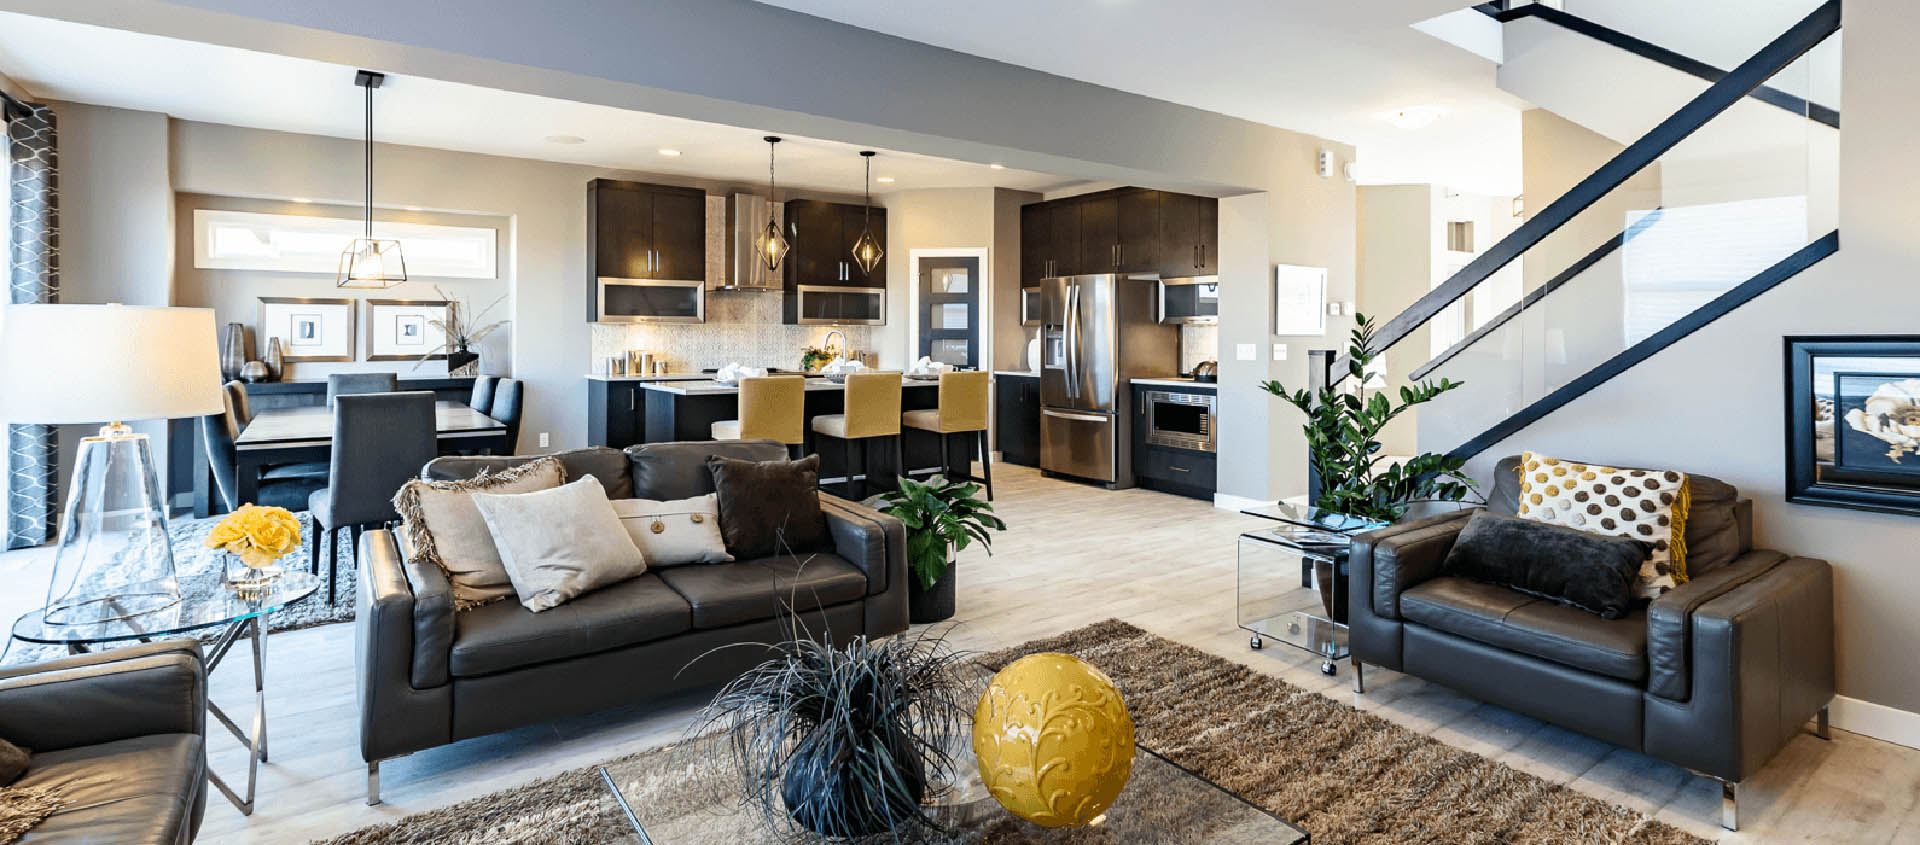 Reasons to Visit a Show Home Featured Image